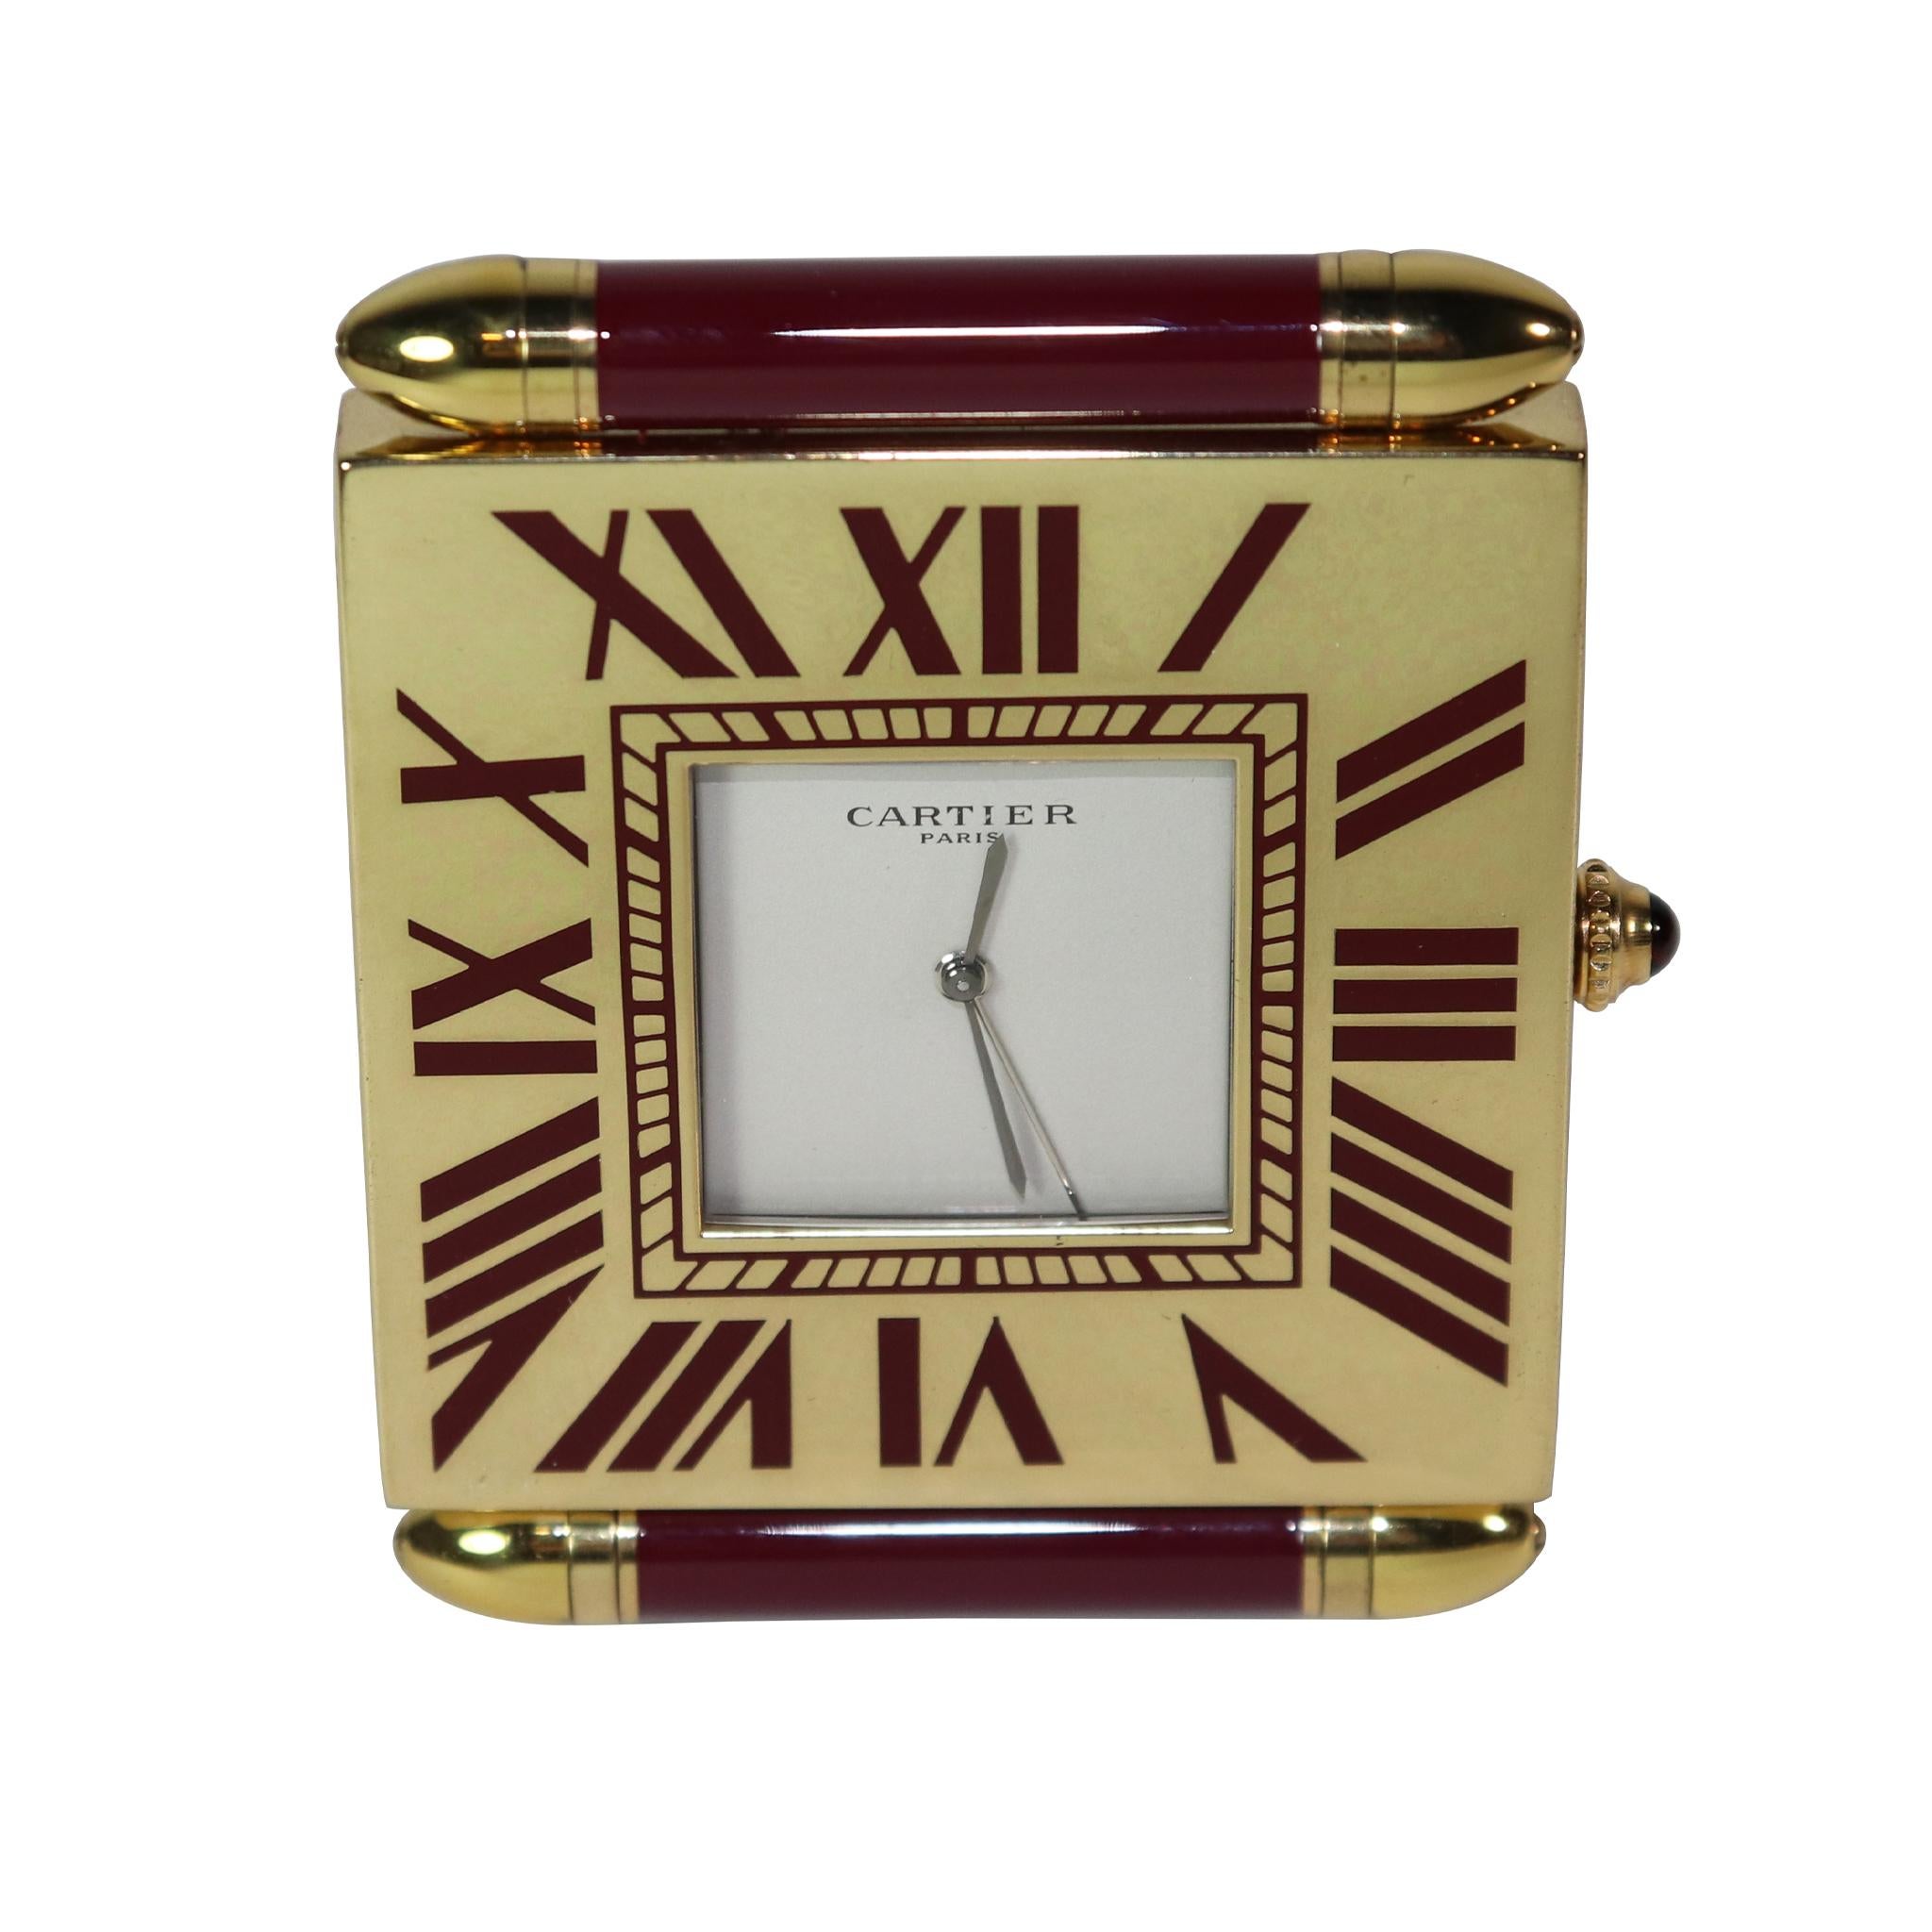  Vintage Cartier ladies, or gentlemen's folding gold-plated quadrant traveling alarm clock.
Circa  second quarter of the 20th century. Displays on its flip-over hinged base stand. 

Personally inscribed from ABBY to ( MARY) Clancy Collins daughter